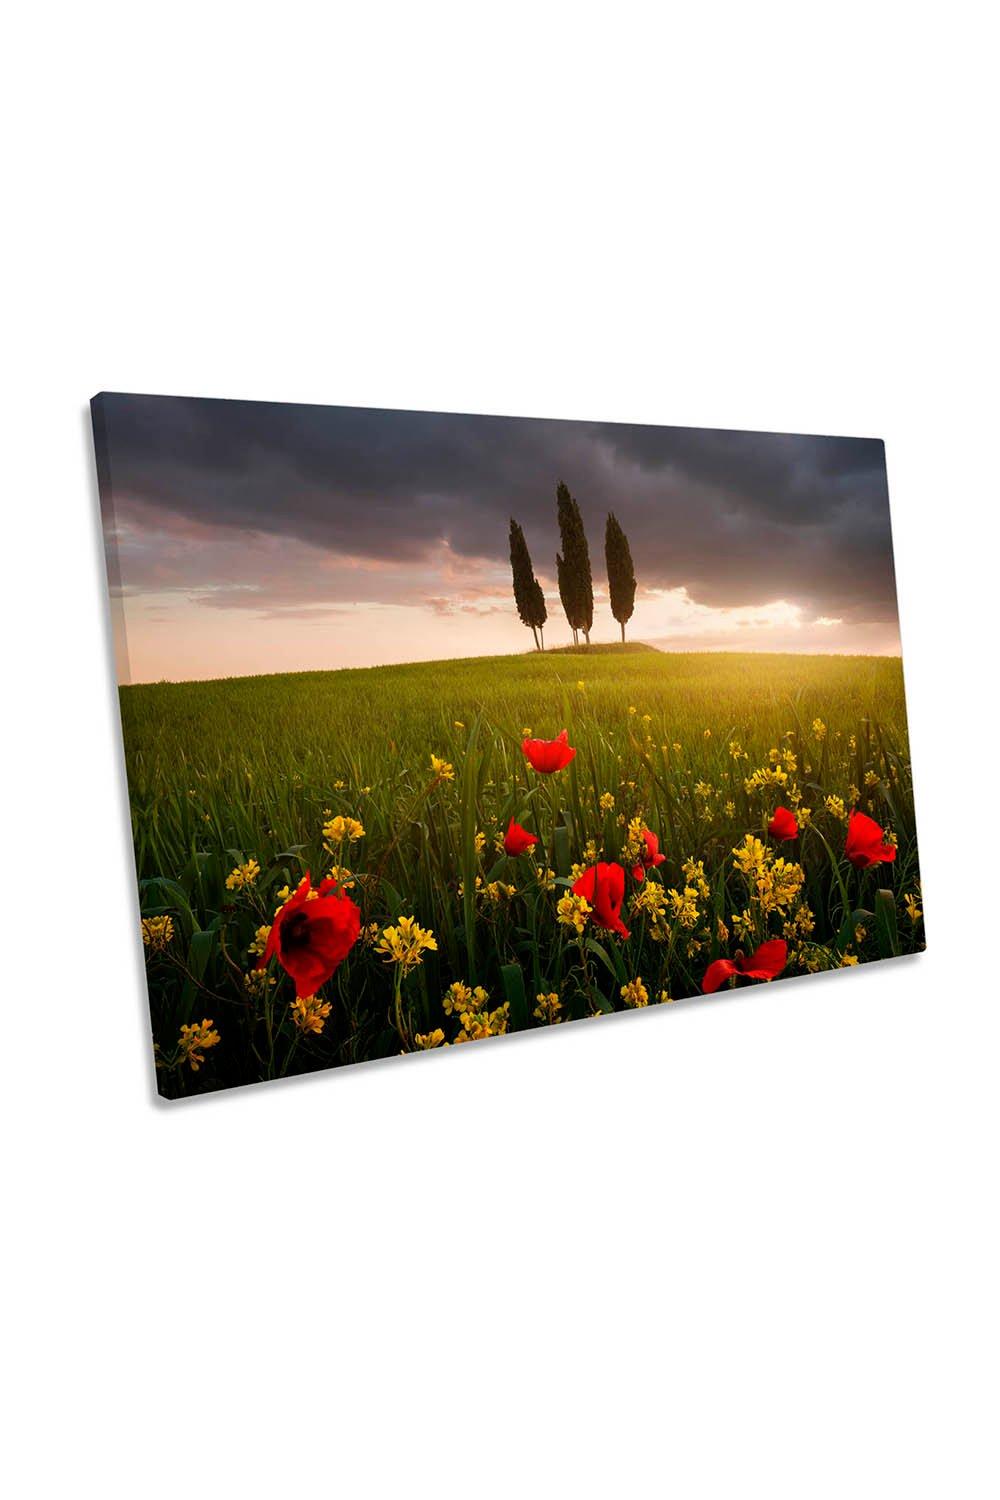 Blooming Tuscany Landscape Flowers Canvas Wall Art Picture Print